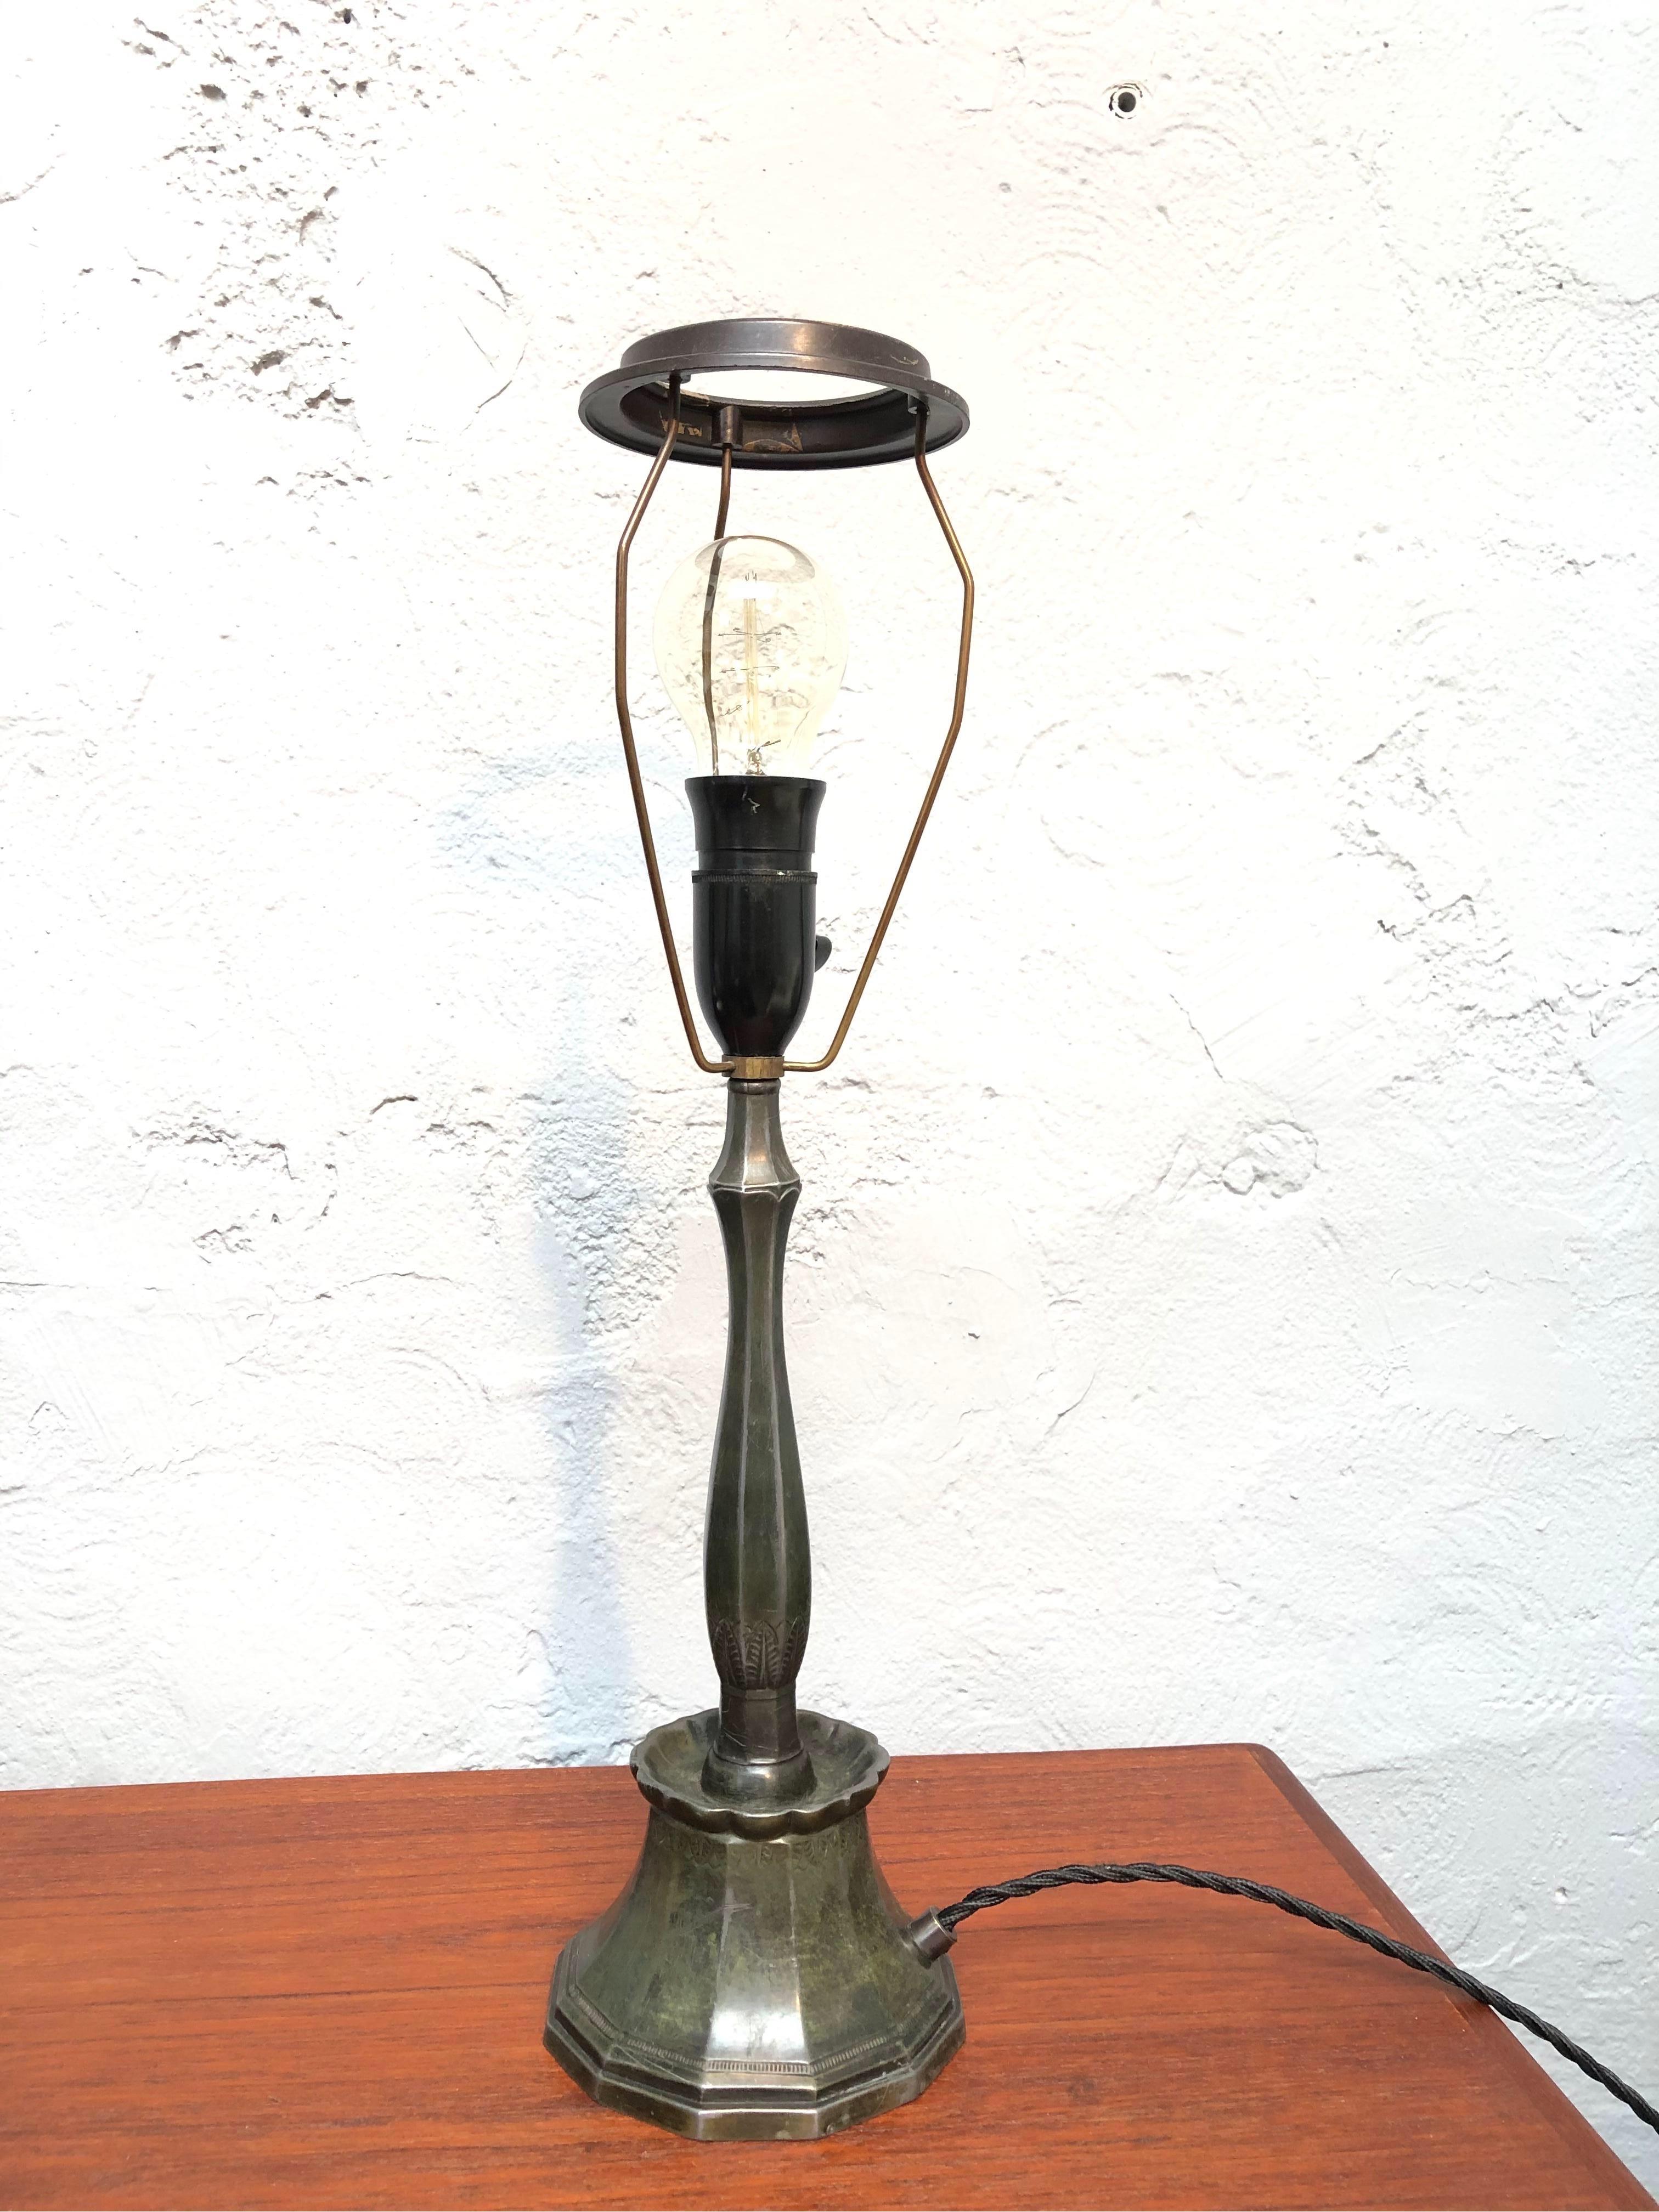 Antique Art Deco Just Andersen disko metal table lamp marked “JUST” on the base.
In original condition with its Bakelite E27 lamp holder with an off/on switch.
Can be fitted with an EU UK or US plug.
Just Andersen was a Danish Sculptor and